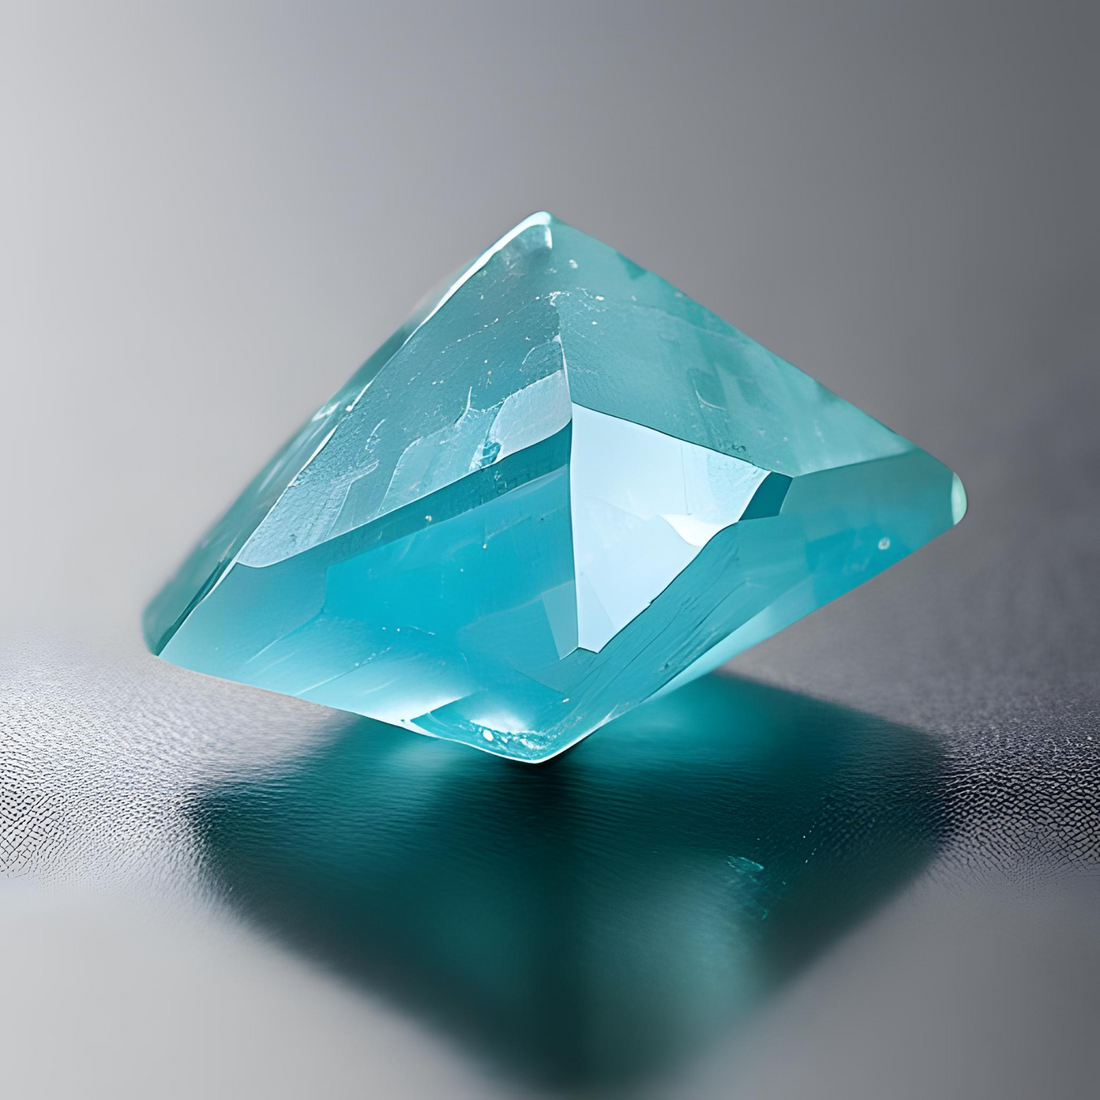 The Healing Power of the Aquamarine Crystal: How This Gemstone Can Boost Your Wellbeing